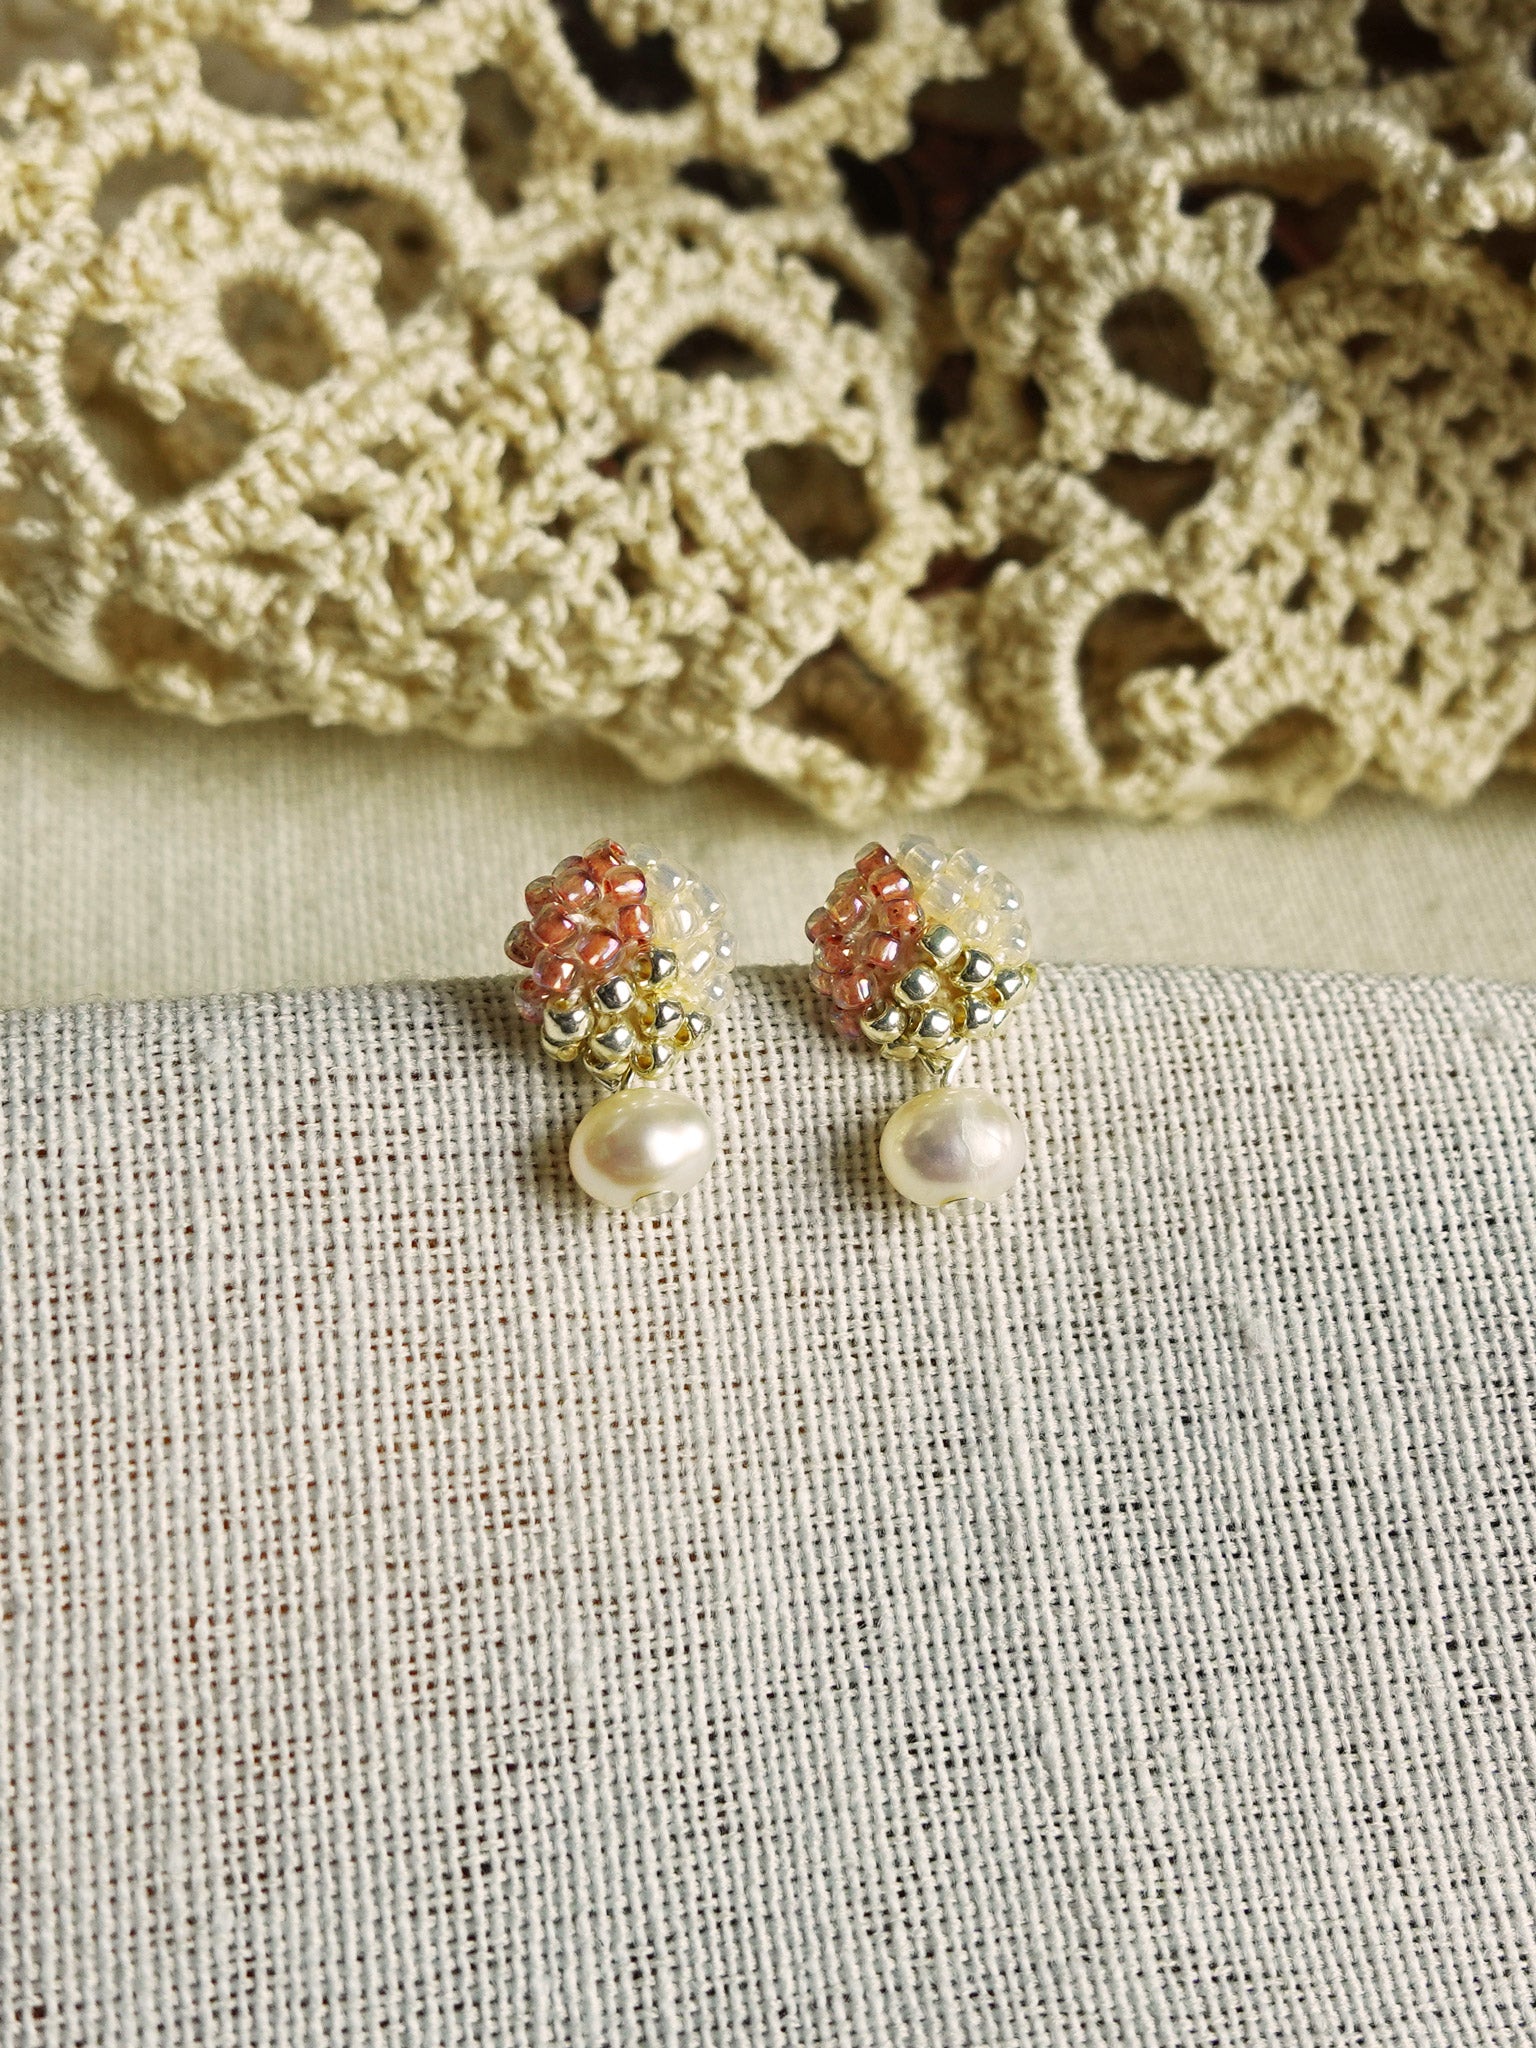 Phoebe Trio Earrings in Strawberry Red Front